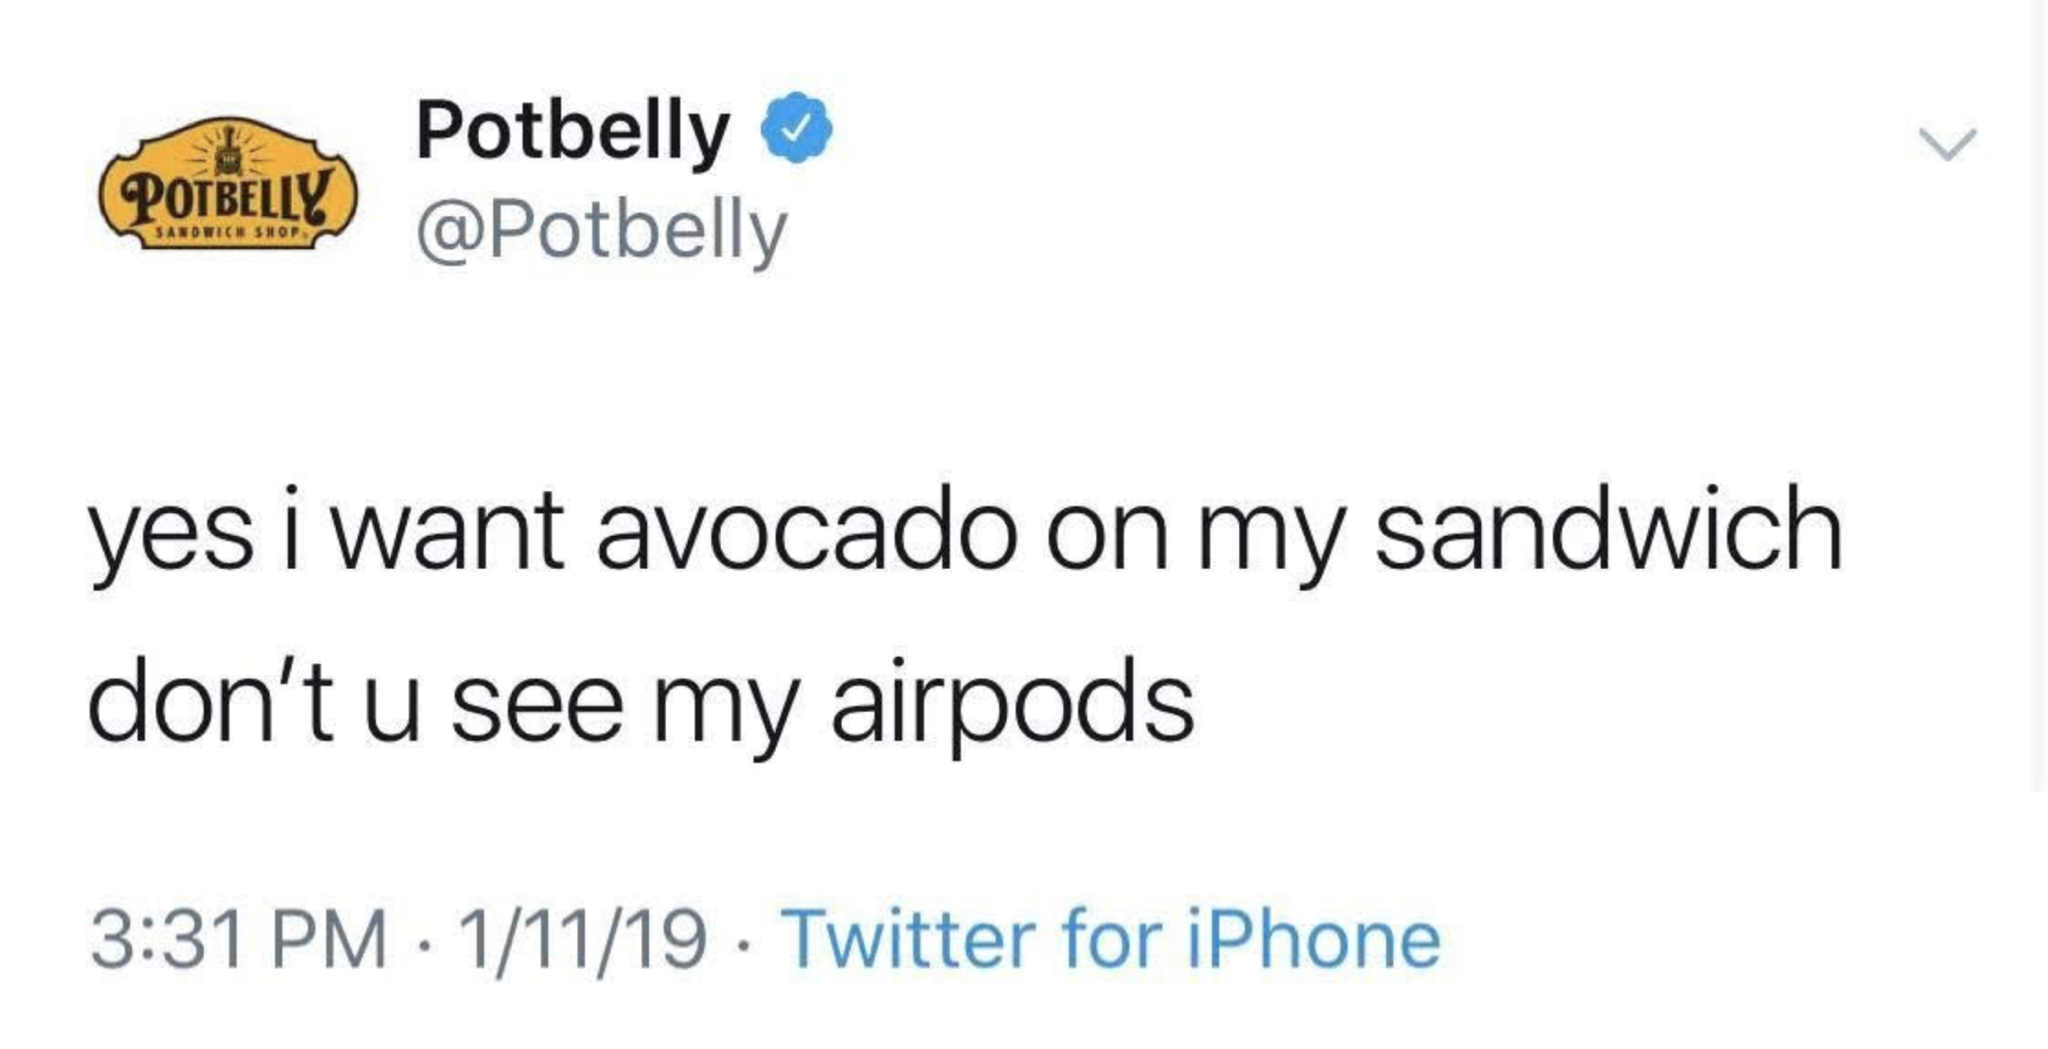 chinese language - Potbelly Potbelly yes i want avocado on my sandwich don't u see my airpods 11119 . Twitter for iPhone